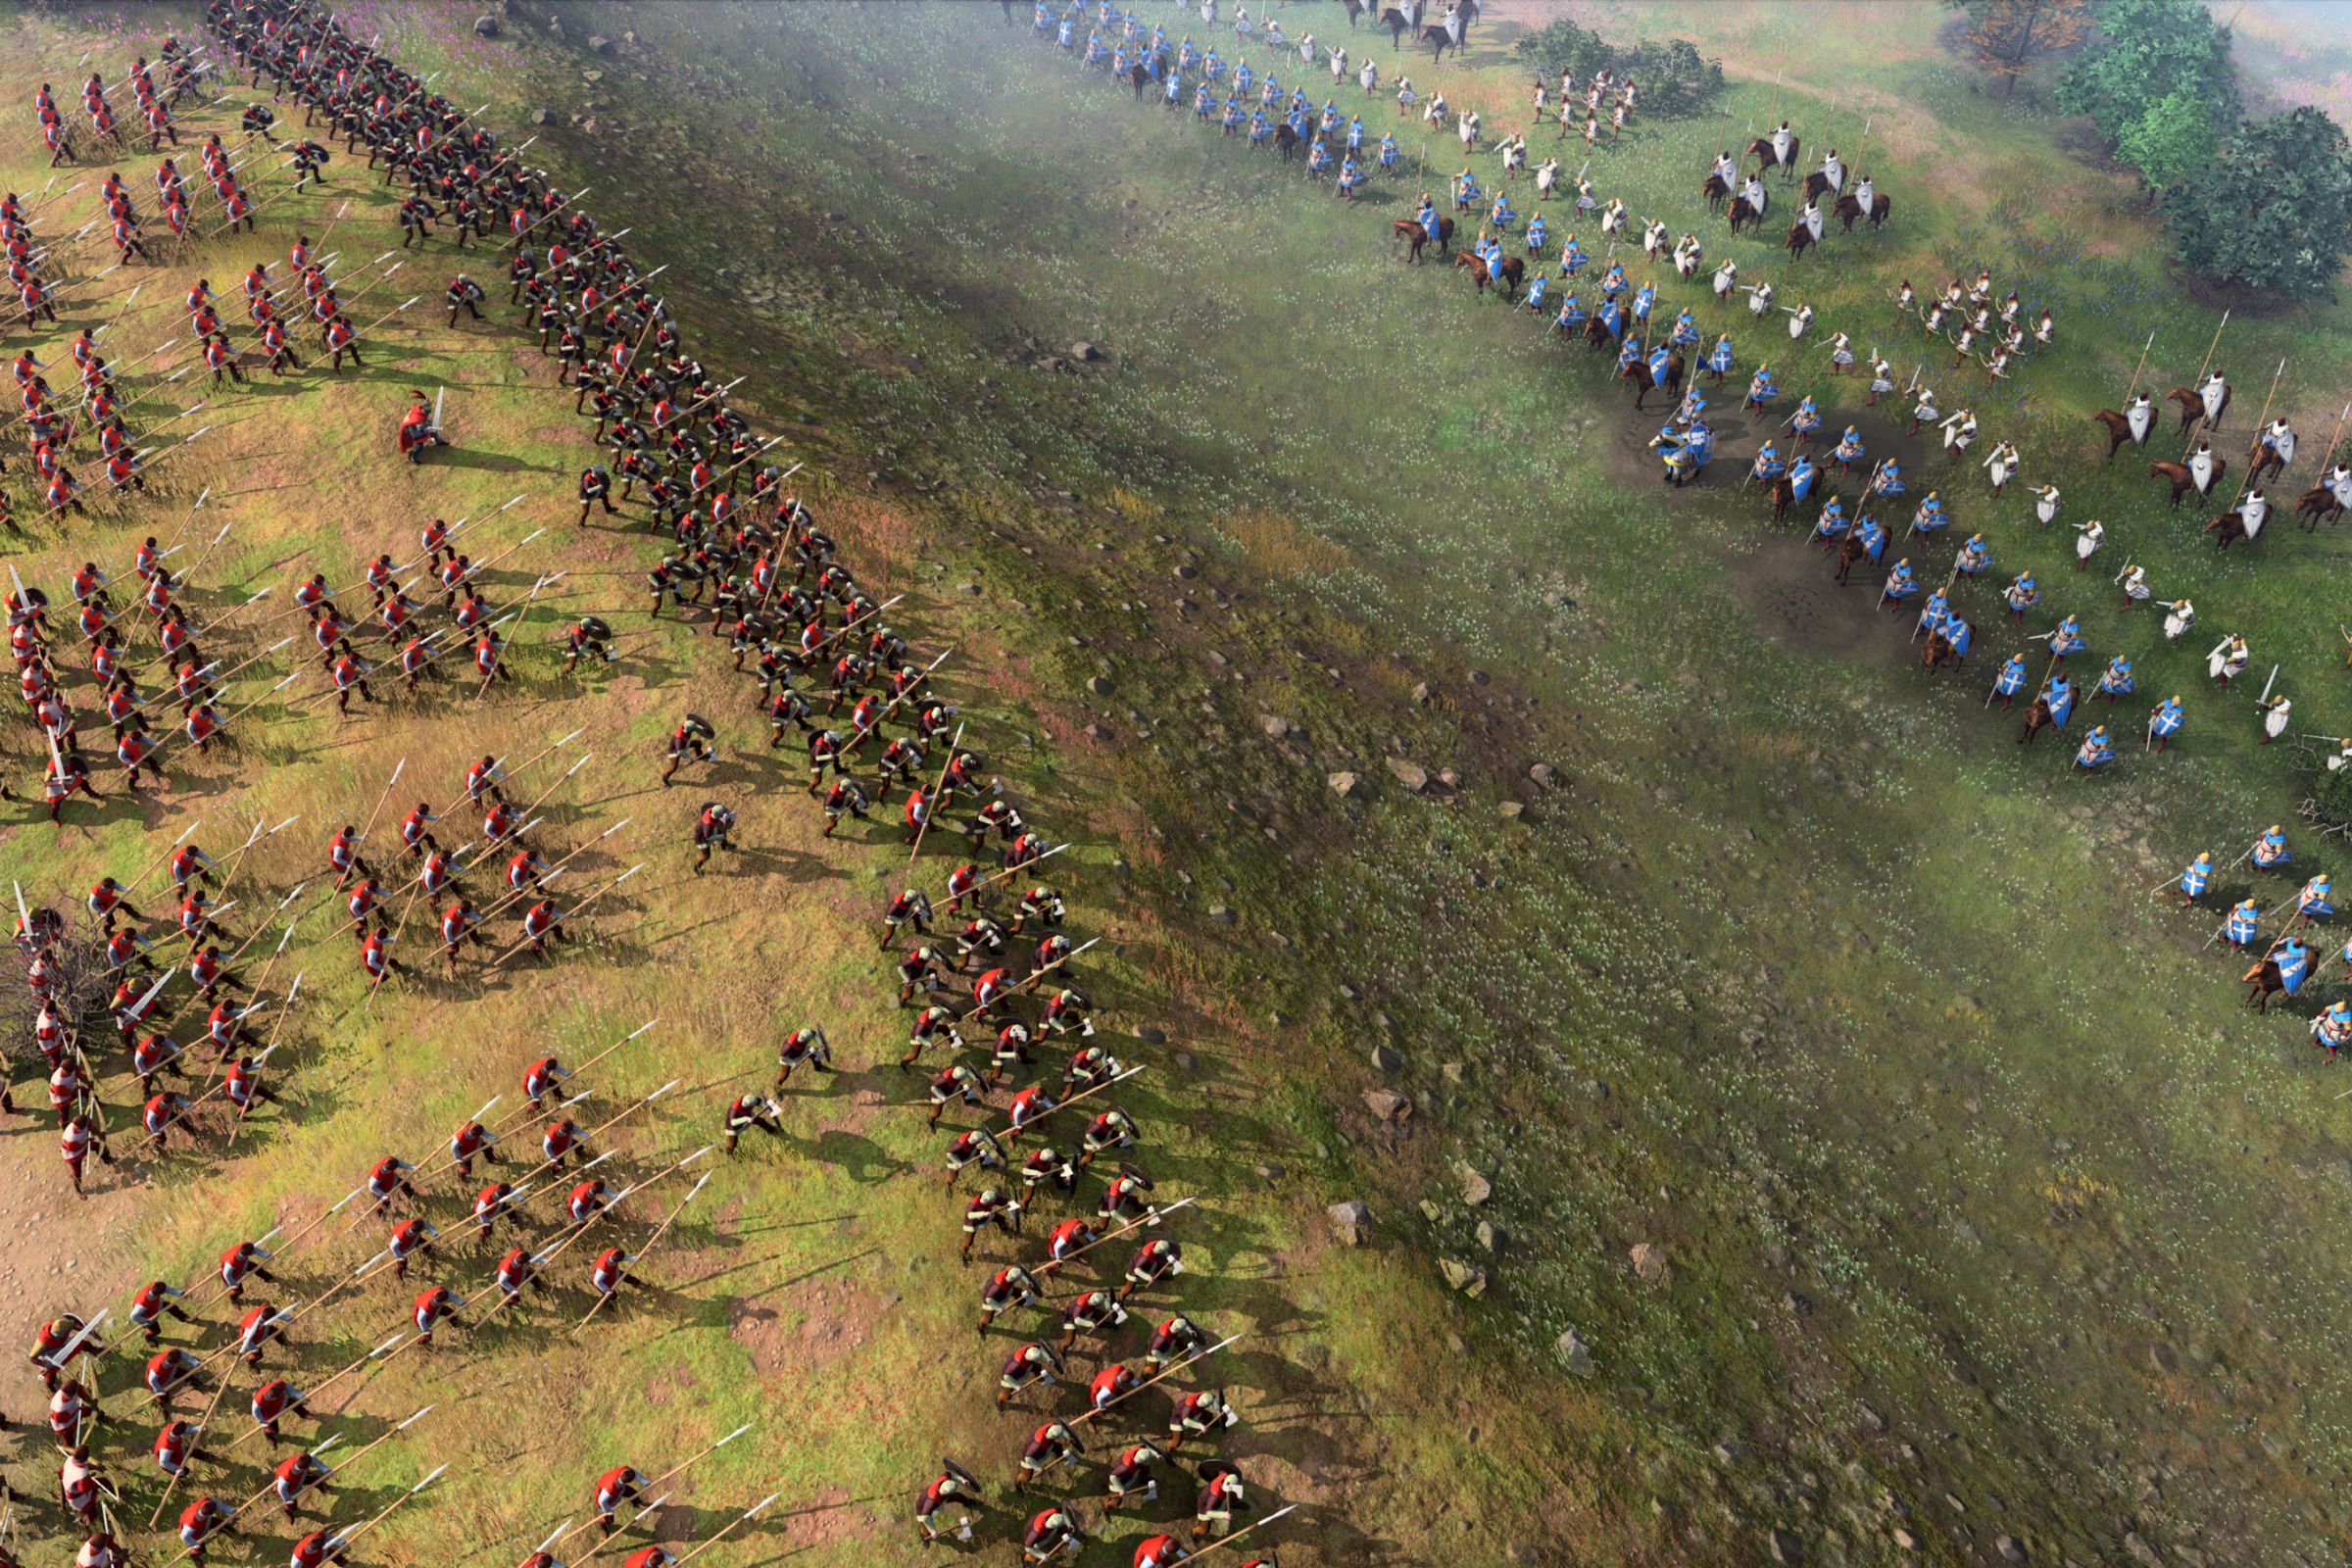 This is a scene from Age of Empires IV, showing two armies battling on a field.